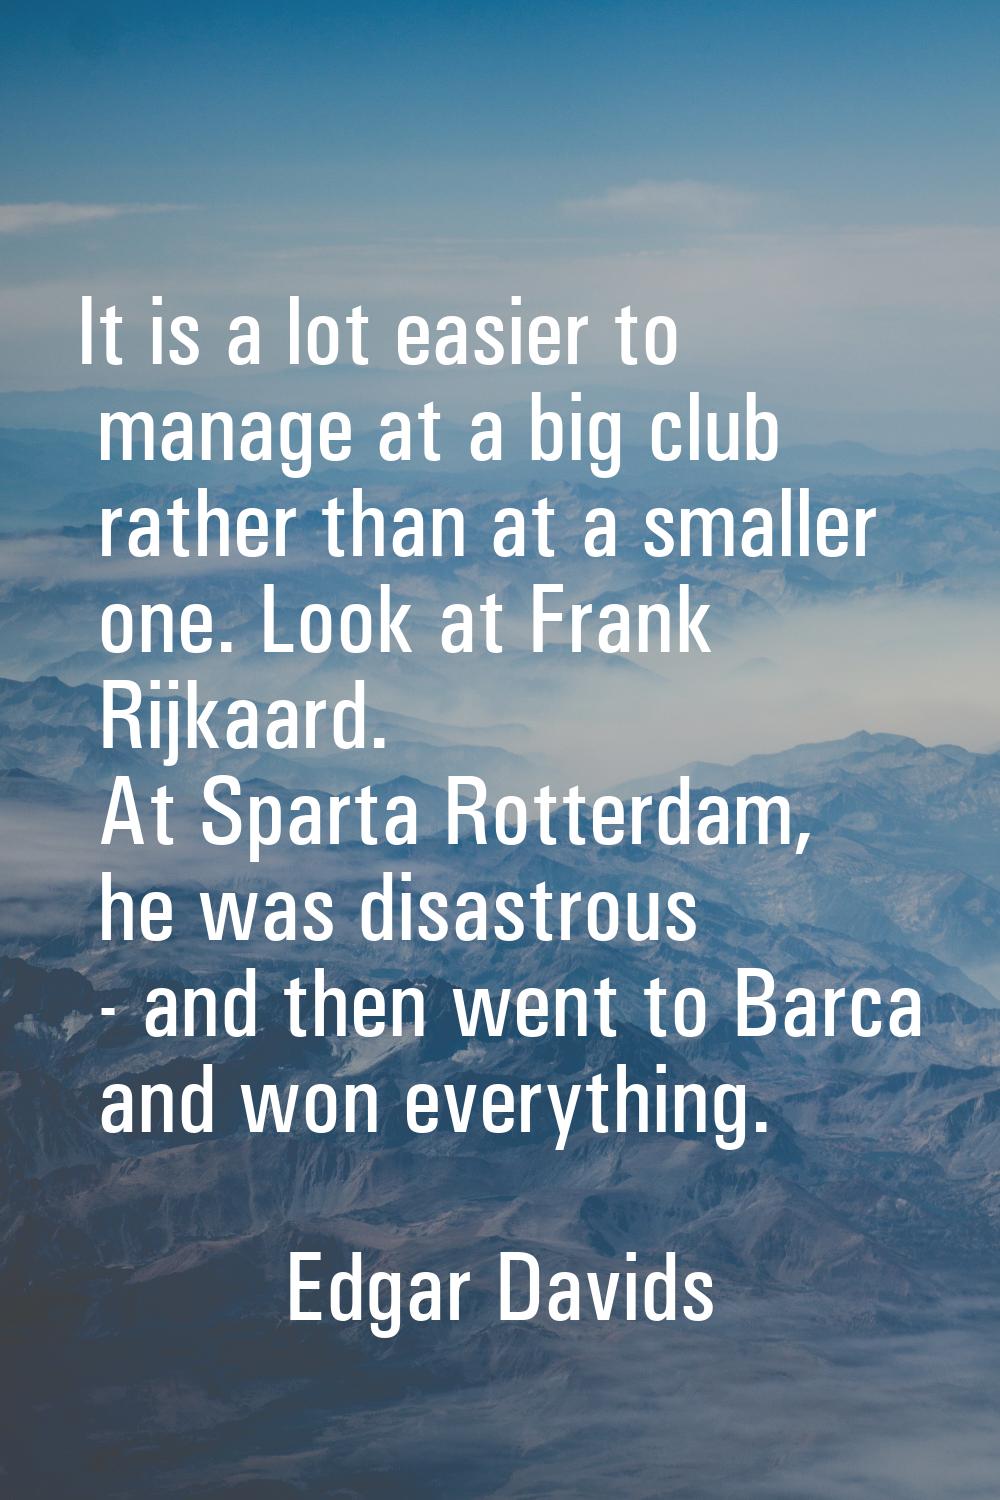 It is a lot easier to manage at a big club rather than at a smaller one. Look at Frank Rijkaard. At